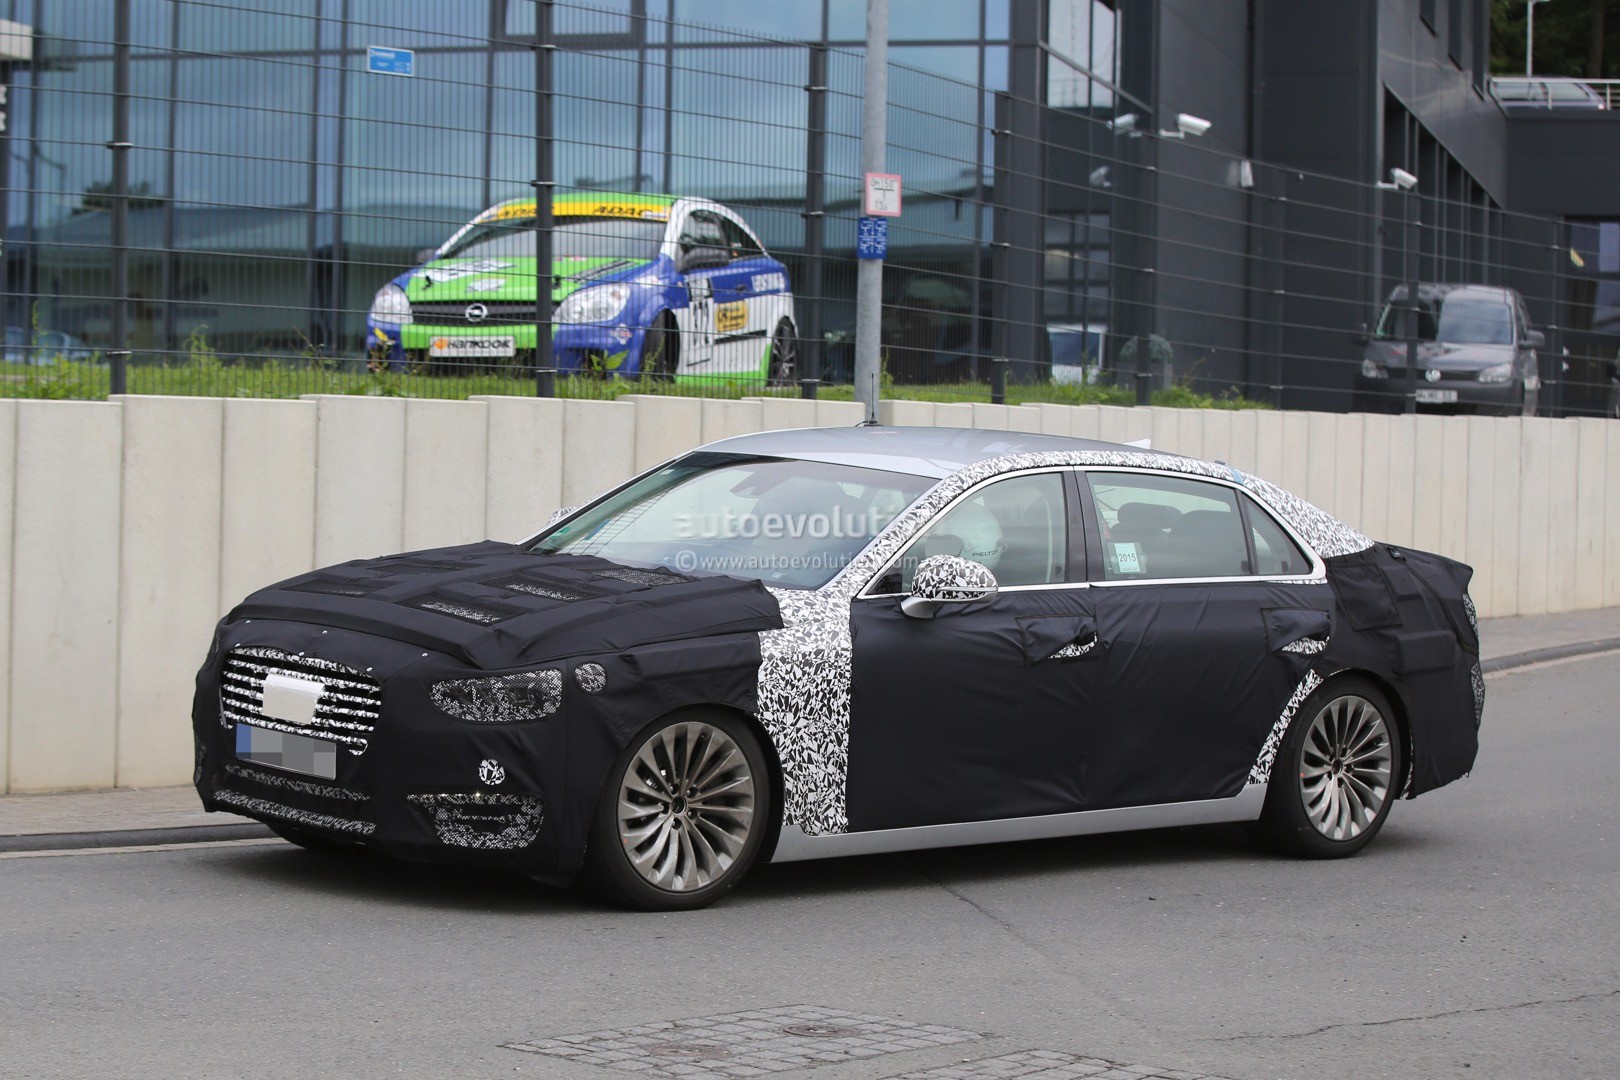 2017 Hyundai Equus Spied Out Testing in Germany - autoevolution